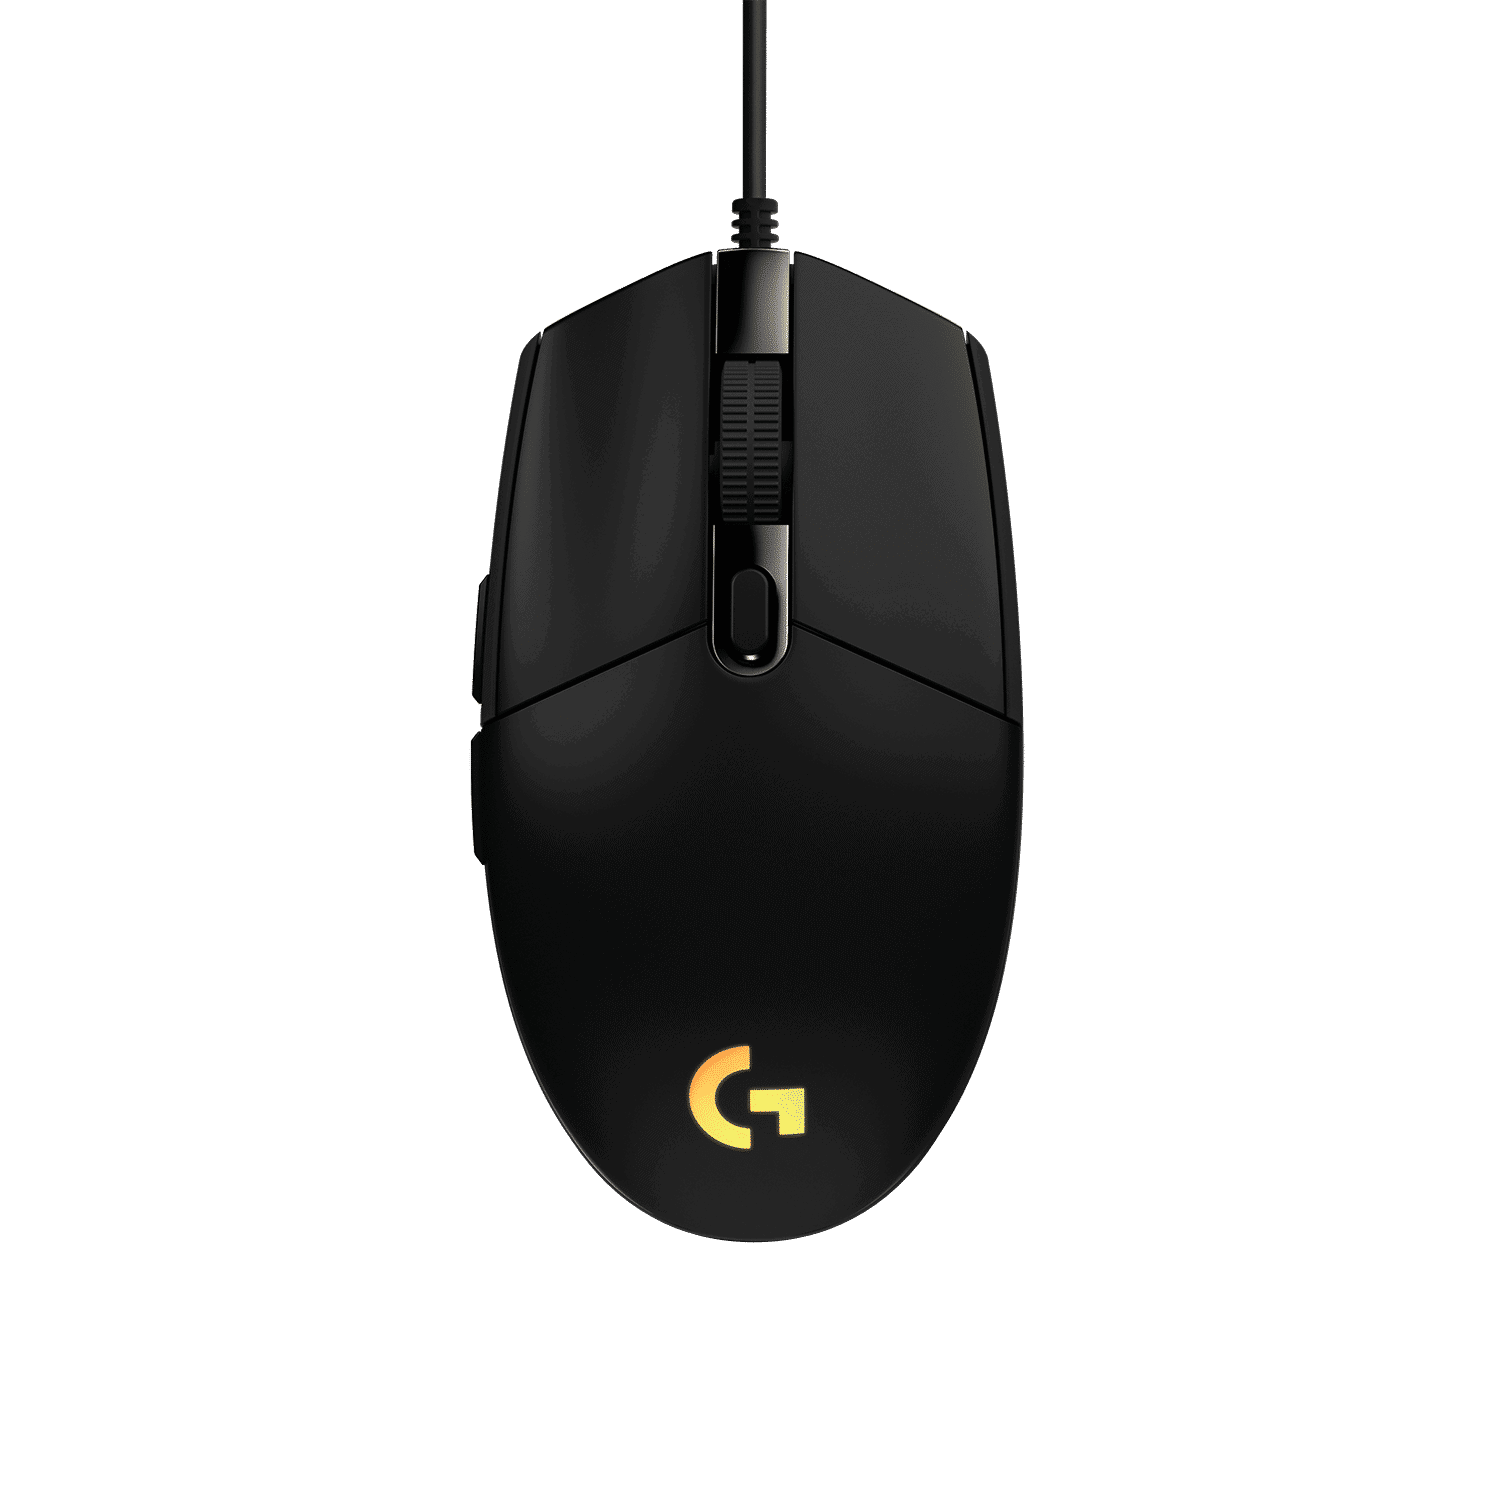 Logitech launches affordable G102 LIGHTSYNC Gaming Mouse